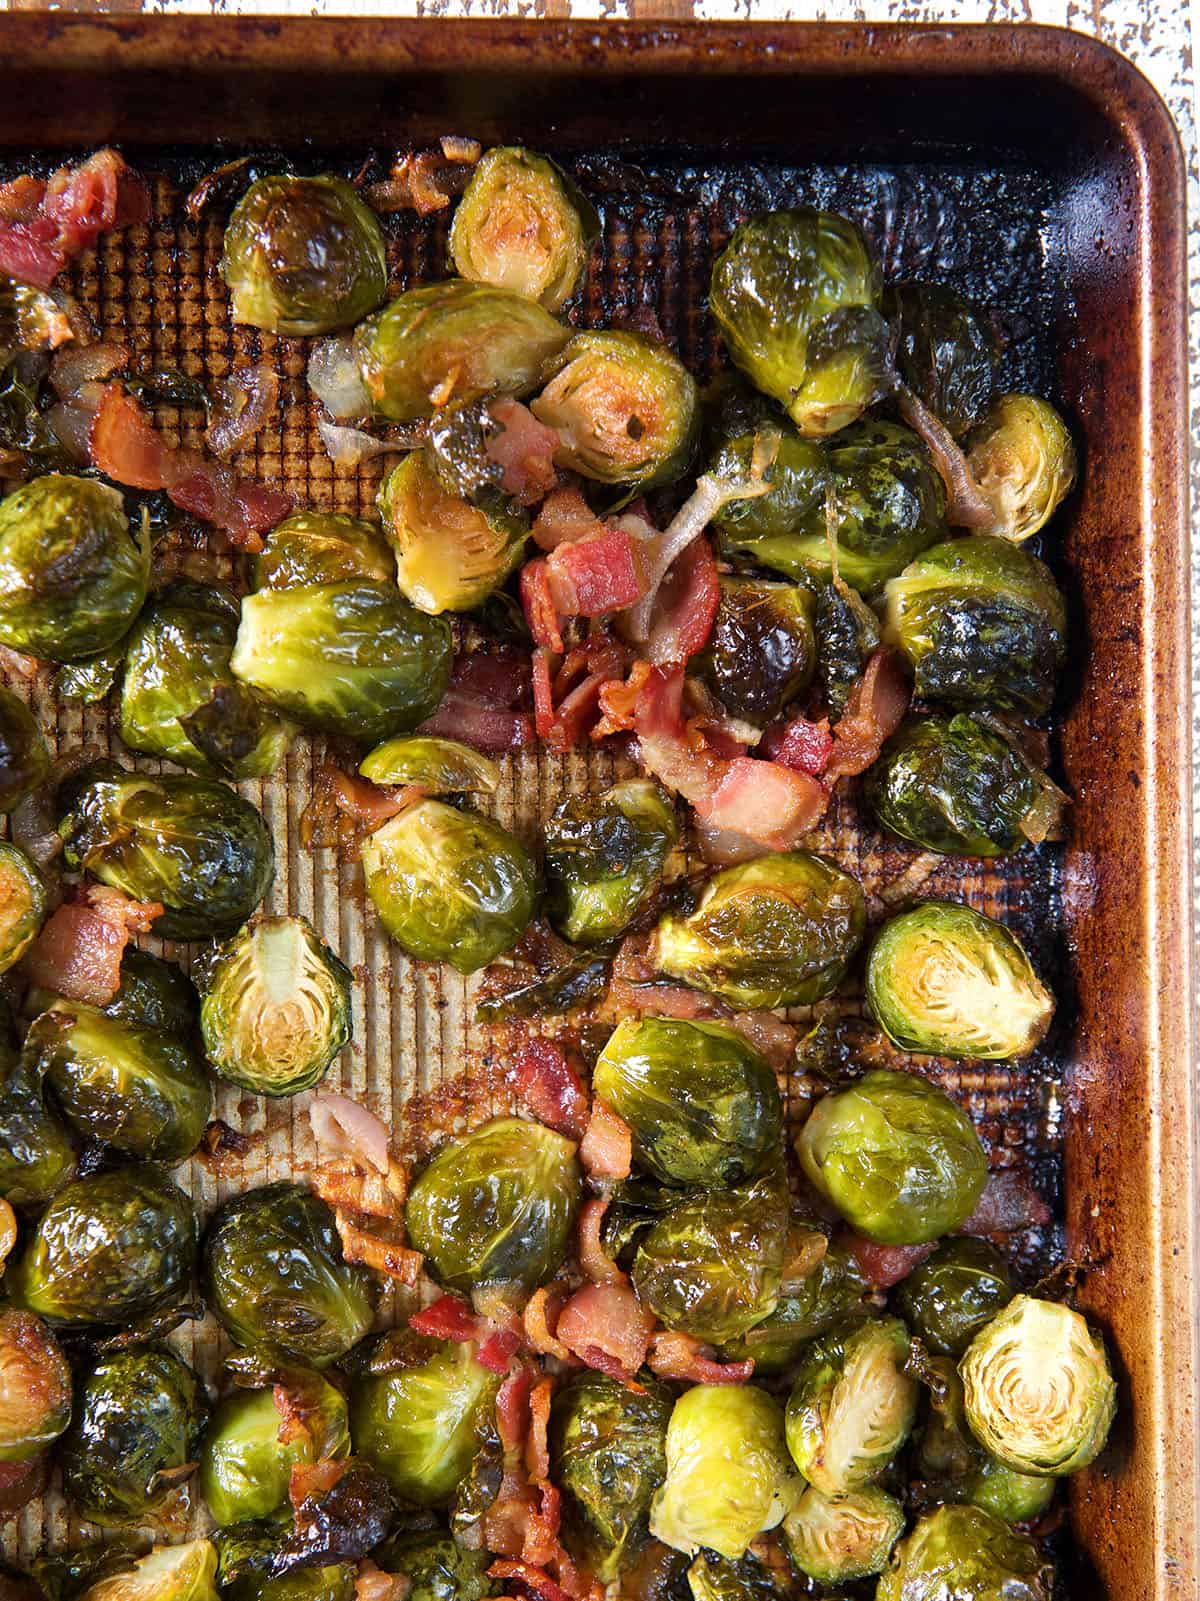 Brussel sprouts and bacon bits are spread out on a baking sheet.